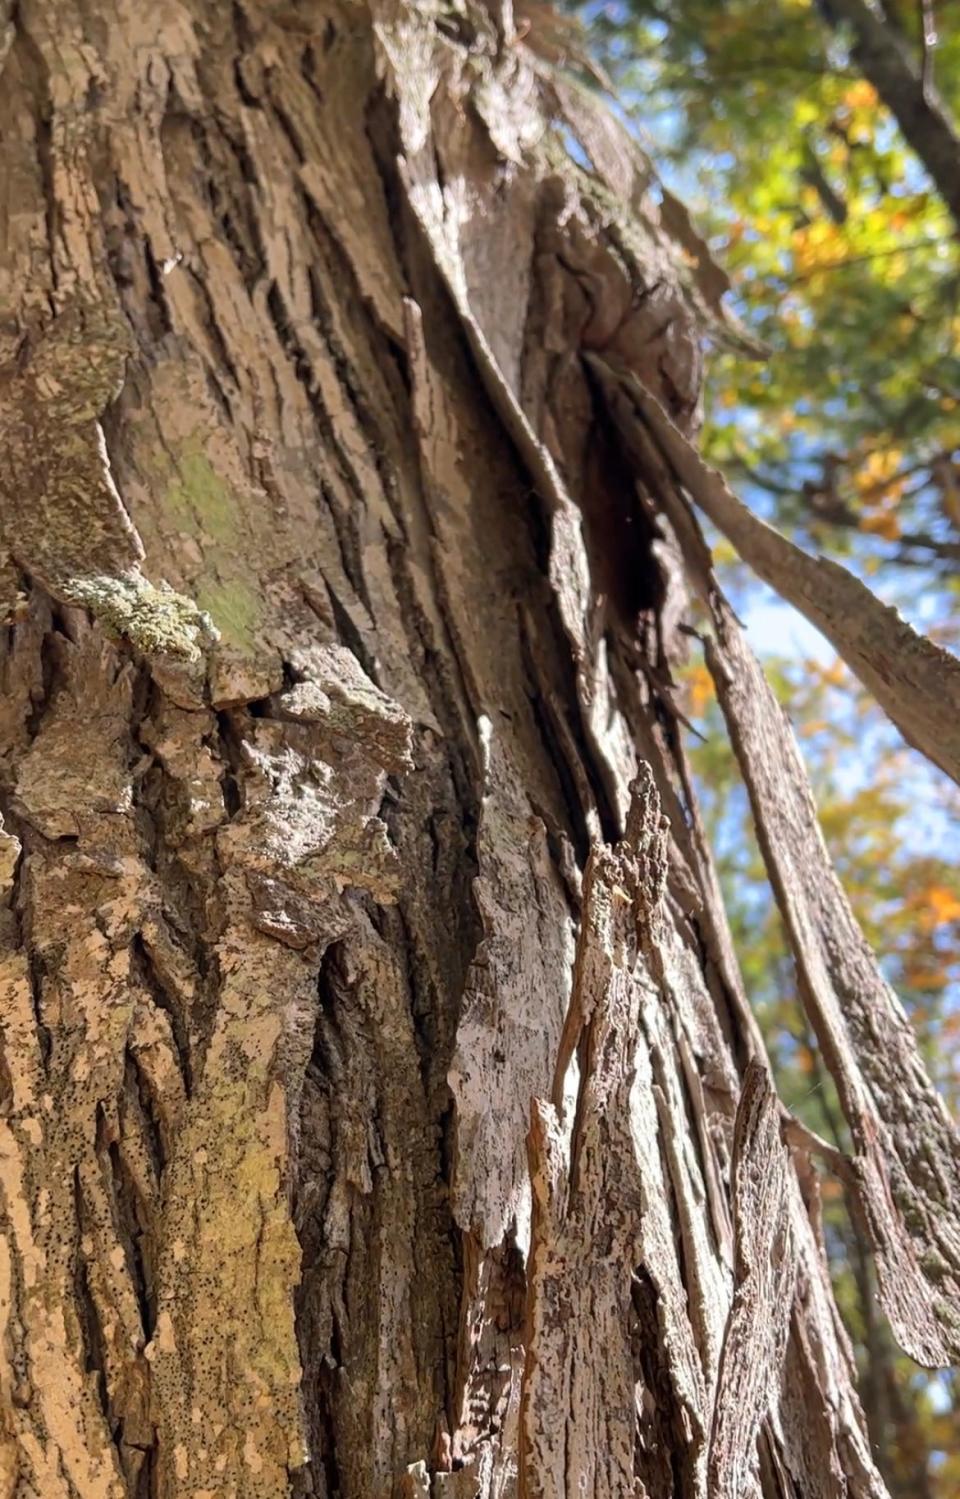 Insects and even bats like the bark of a shagbark hickory tree as a place to shelter.